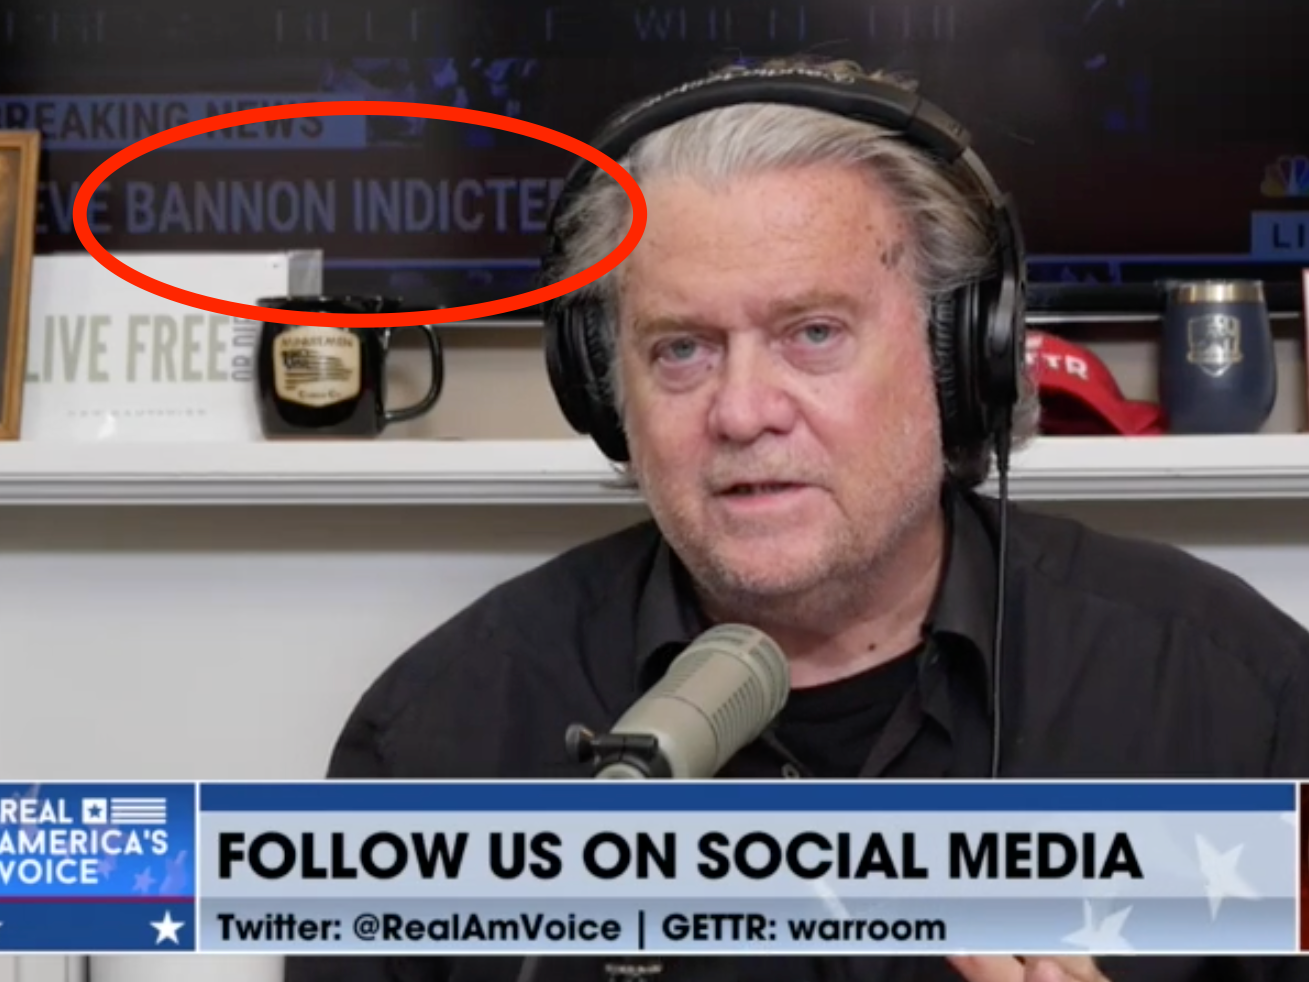 'Bannon indicted' chyron appears behind Steve Bannon on the War Room podcast